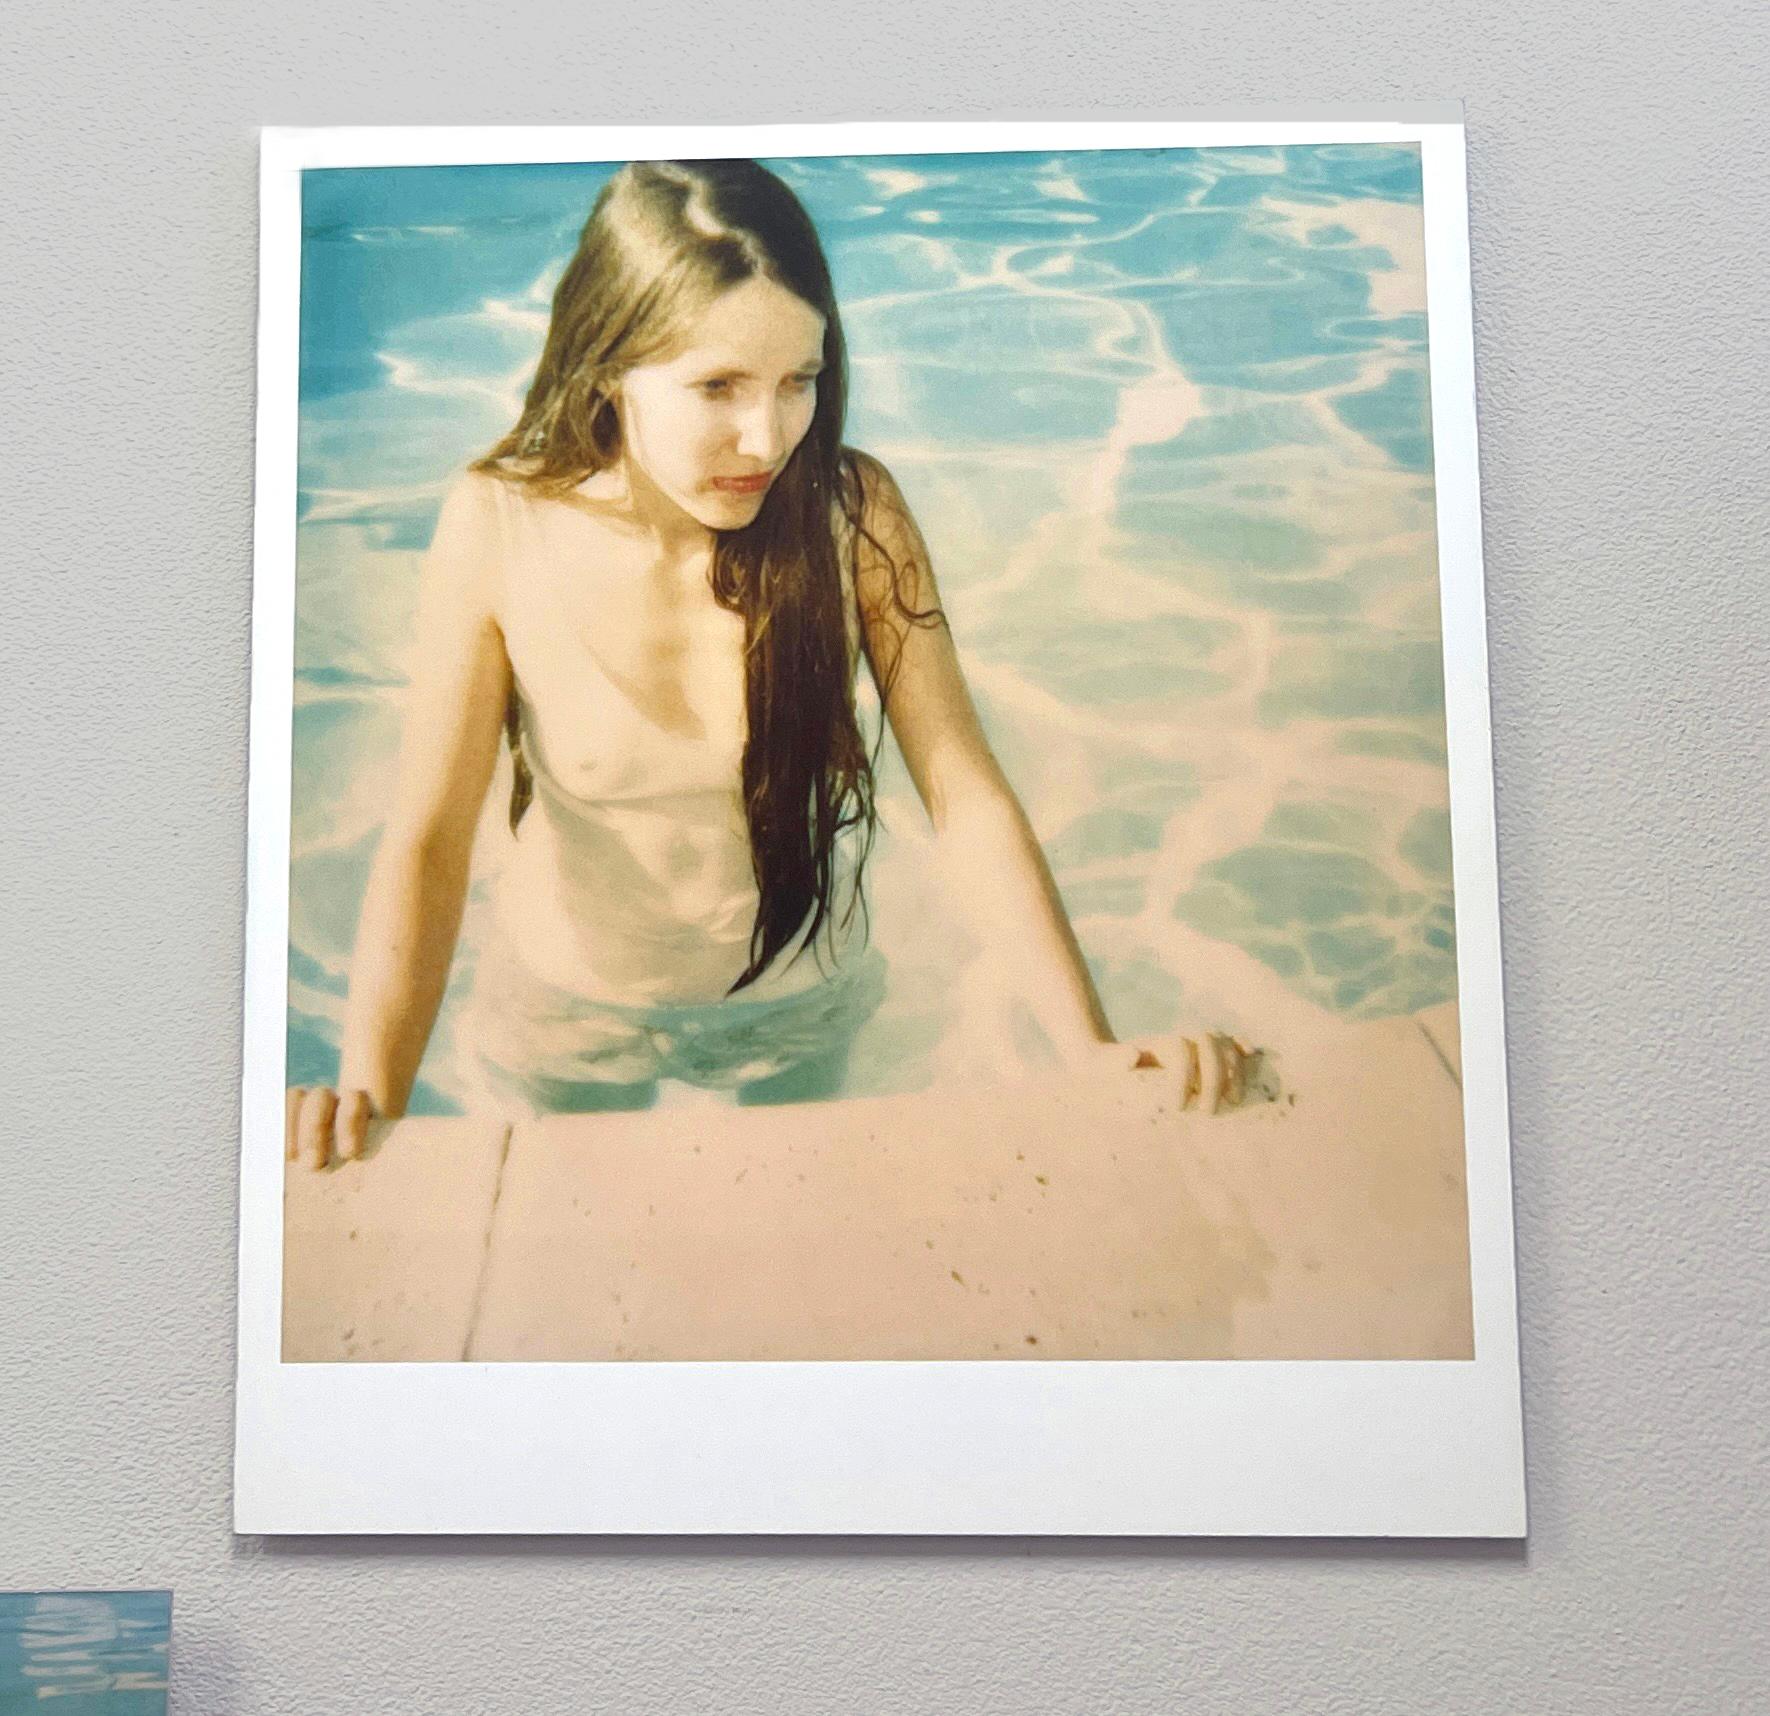 Poolside (29 Palms, CA) - mounted - Contemporary, 21st Century, Polaroid, Woman - Photograph by Stefanie Schneider